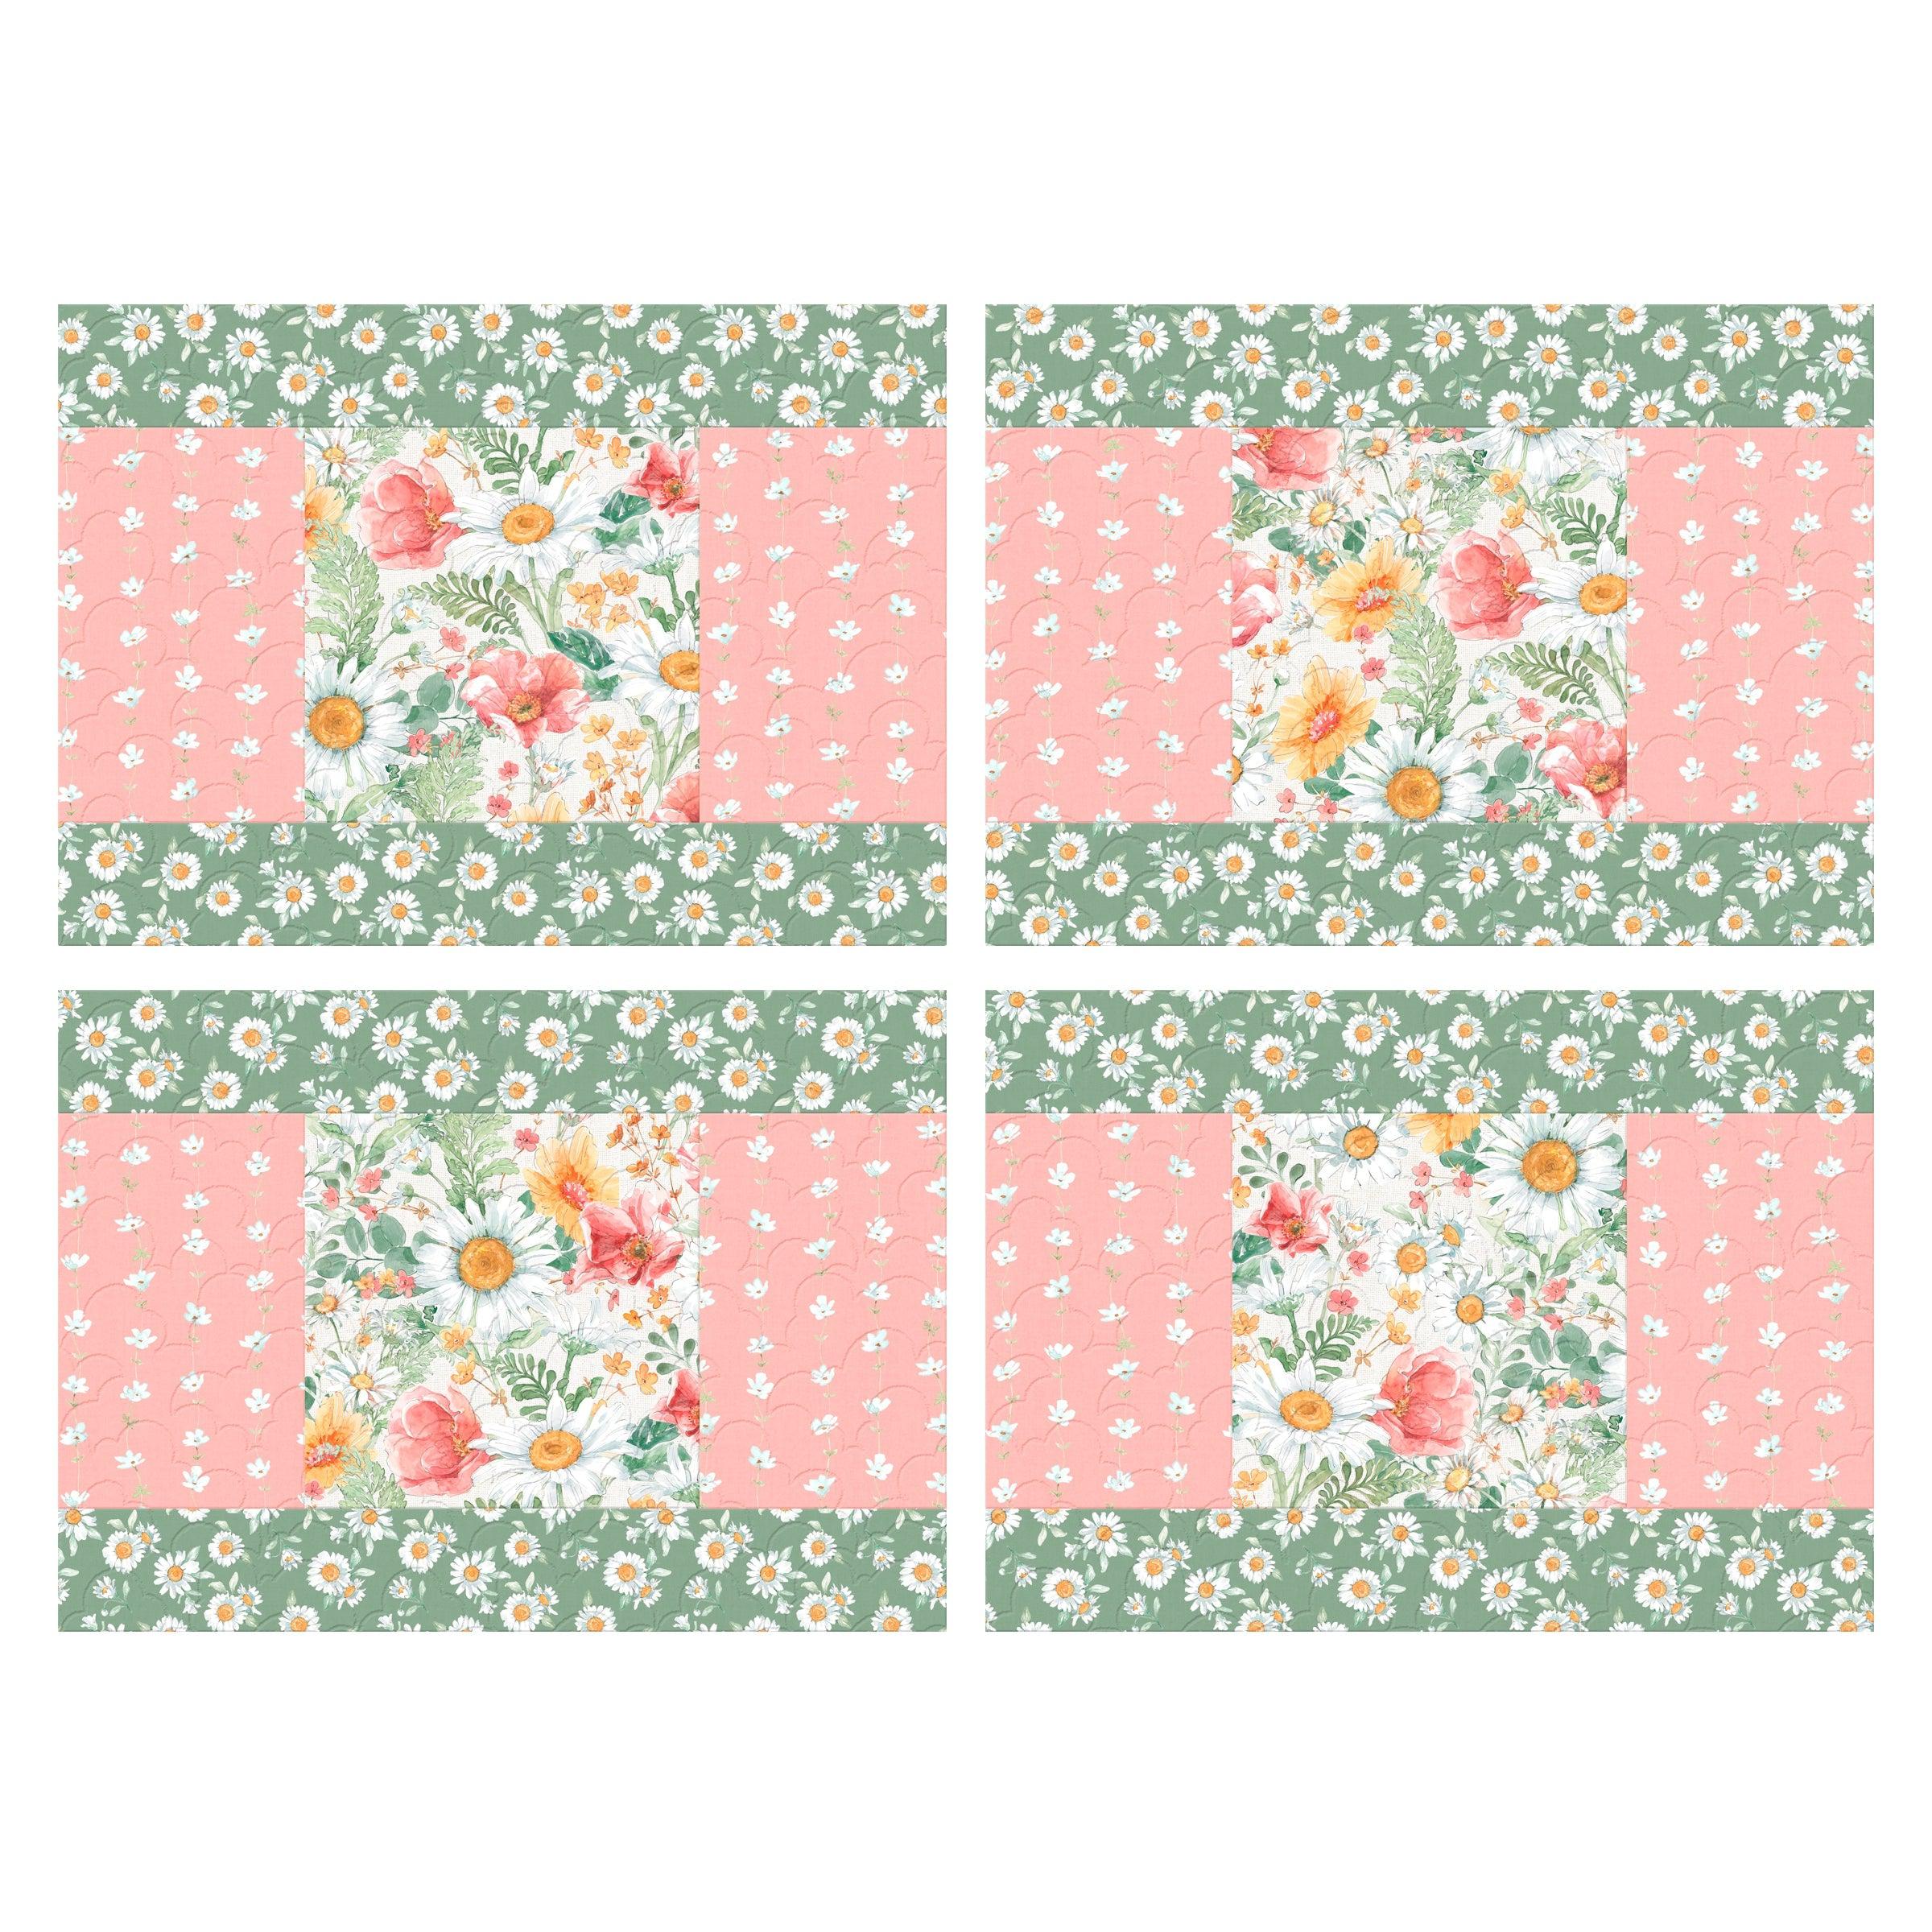 Basic Place Mat 12 - Free Digital Download-Wilmington Prints-My Favorite Quilt Store